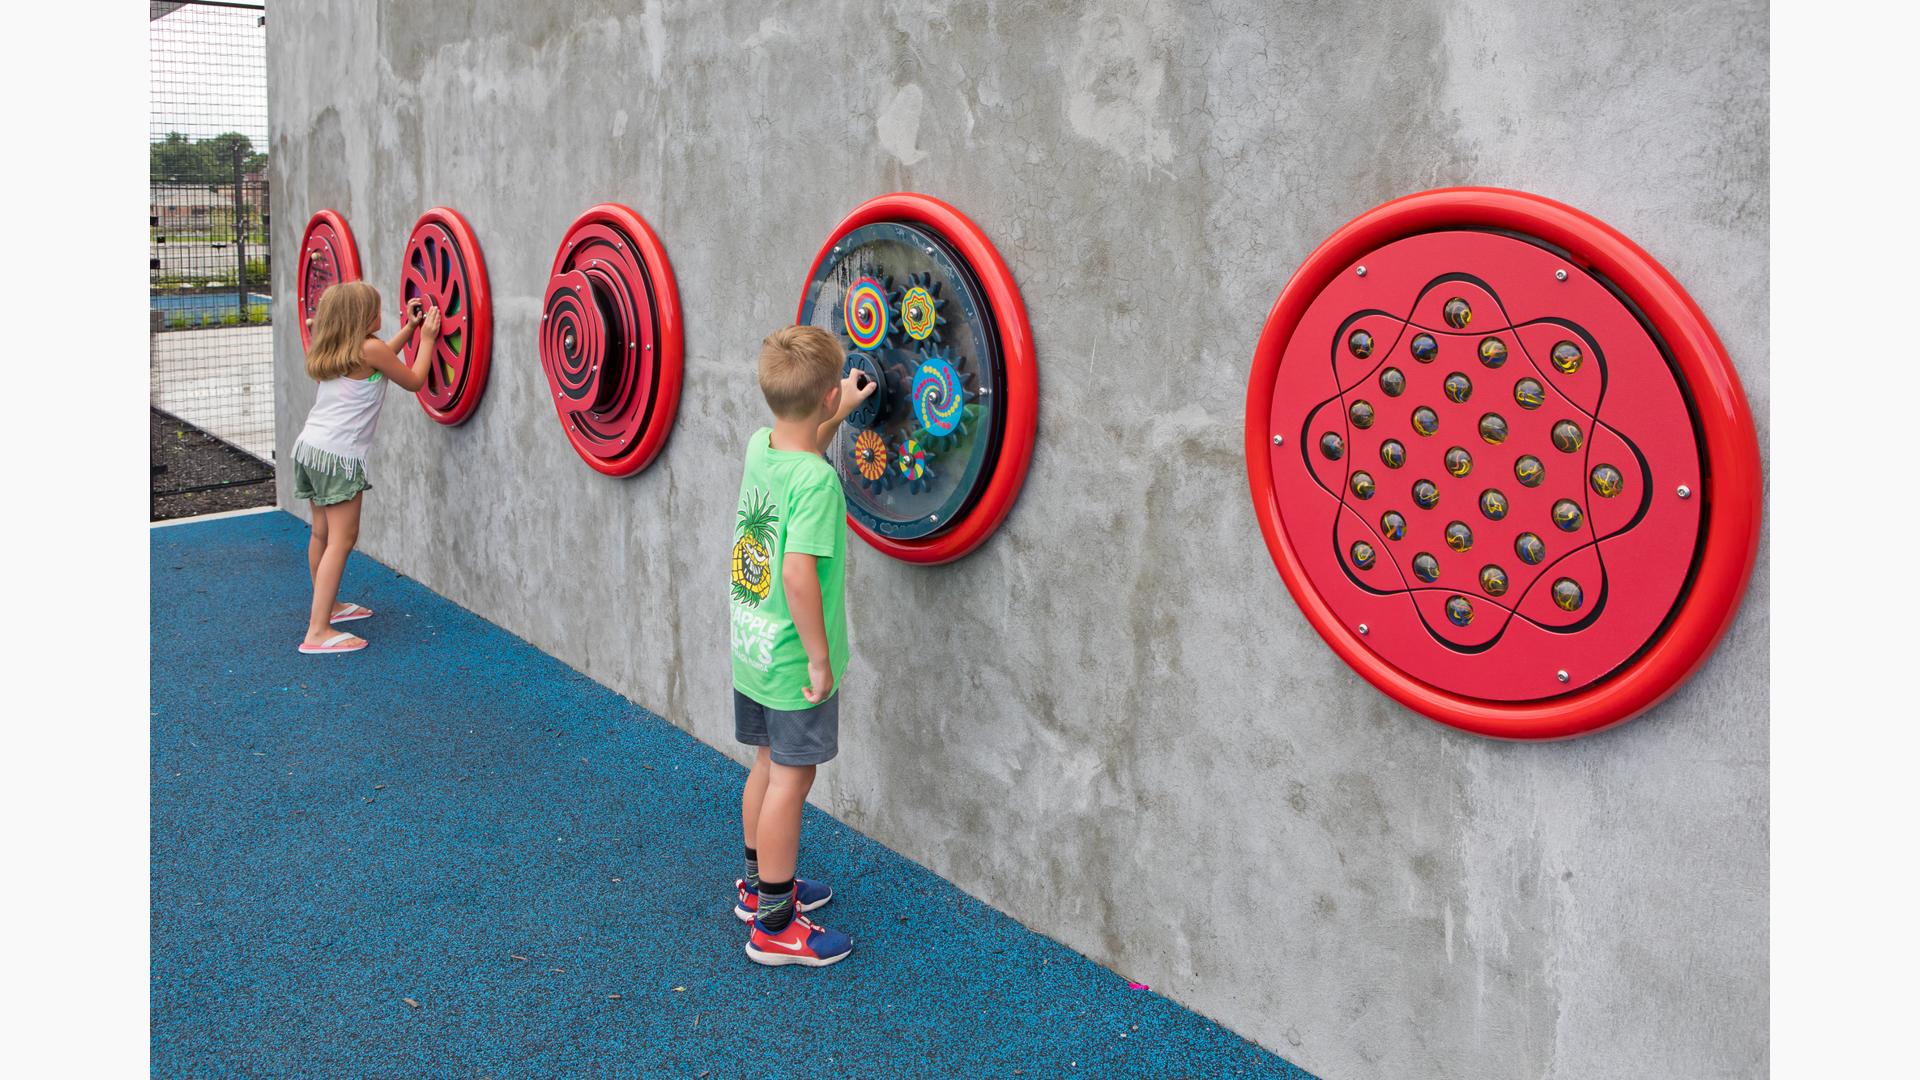 A boy and girl playing with wall mounted games at Prairie Creek Park.